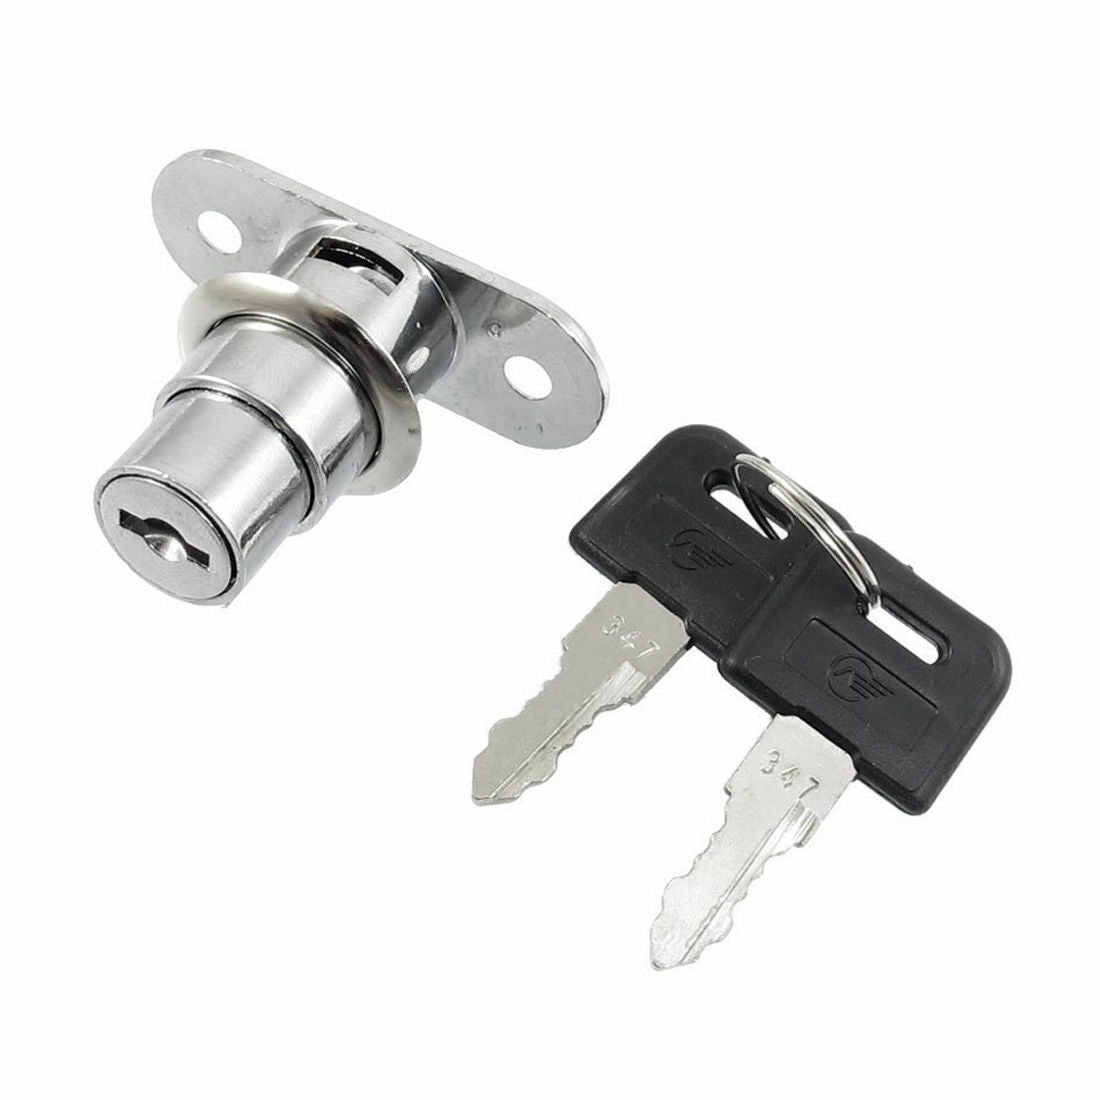 Home Office Door Showcase Cylinder Plunger Lock with 2 Keys